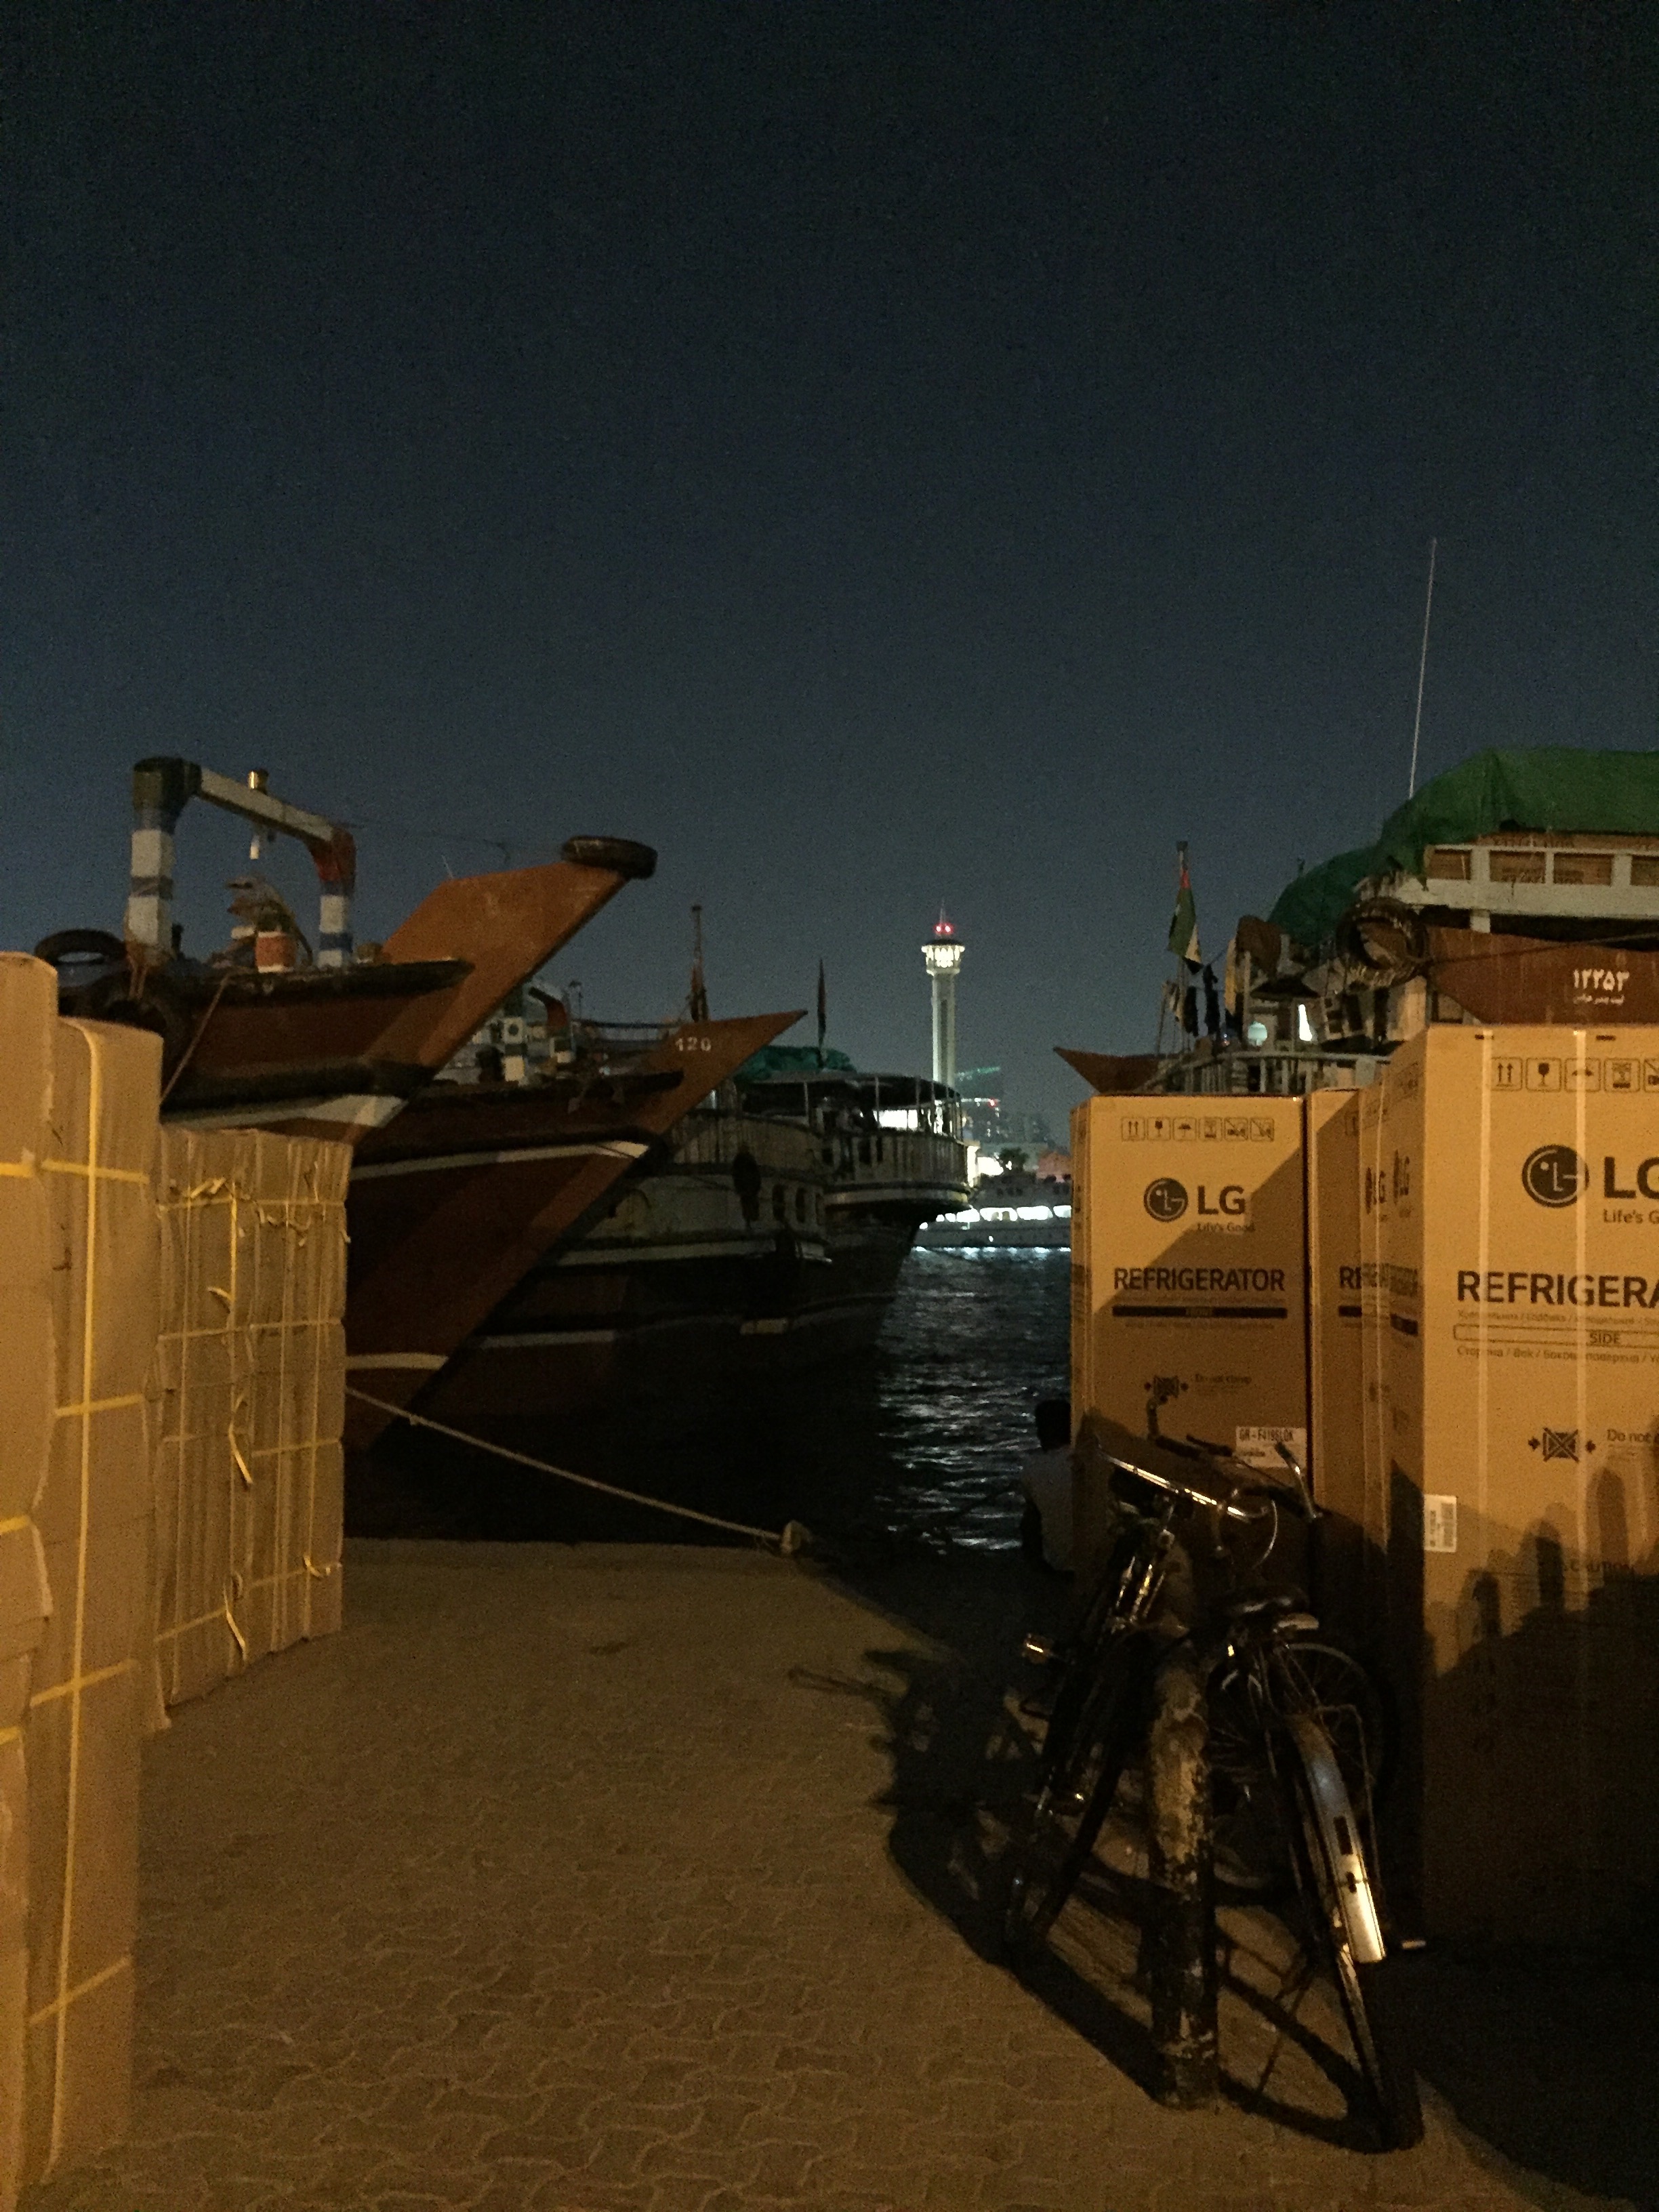  DUBAI | Piles of boxes with goods as diverse as refrigerators, furniture and good line the wharves in Dubai Creek. Workers from Pakistan, Somalia, Iran and India load the cargo to bring back to their home countries, navigating a path used by traders